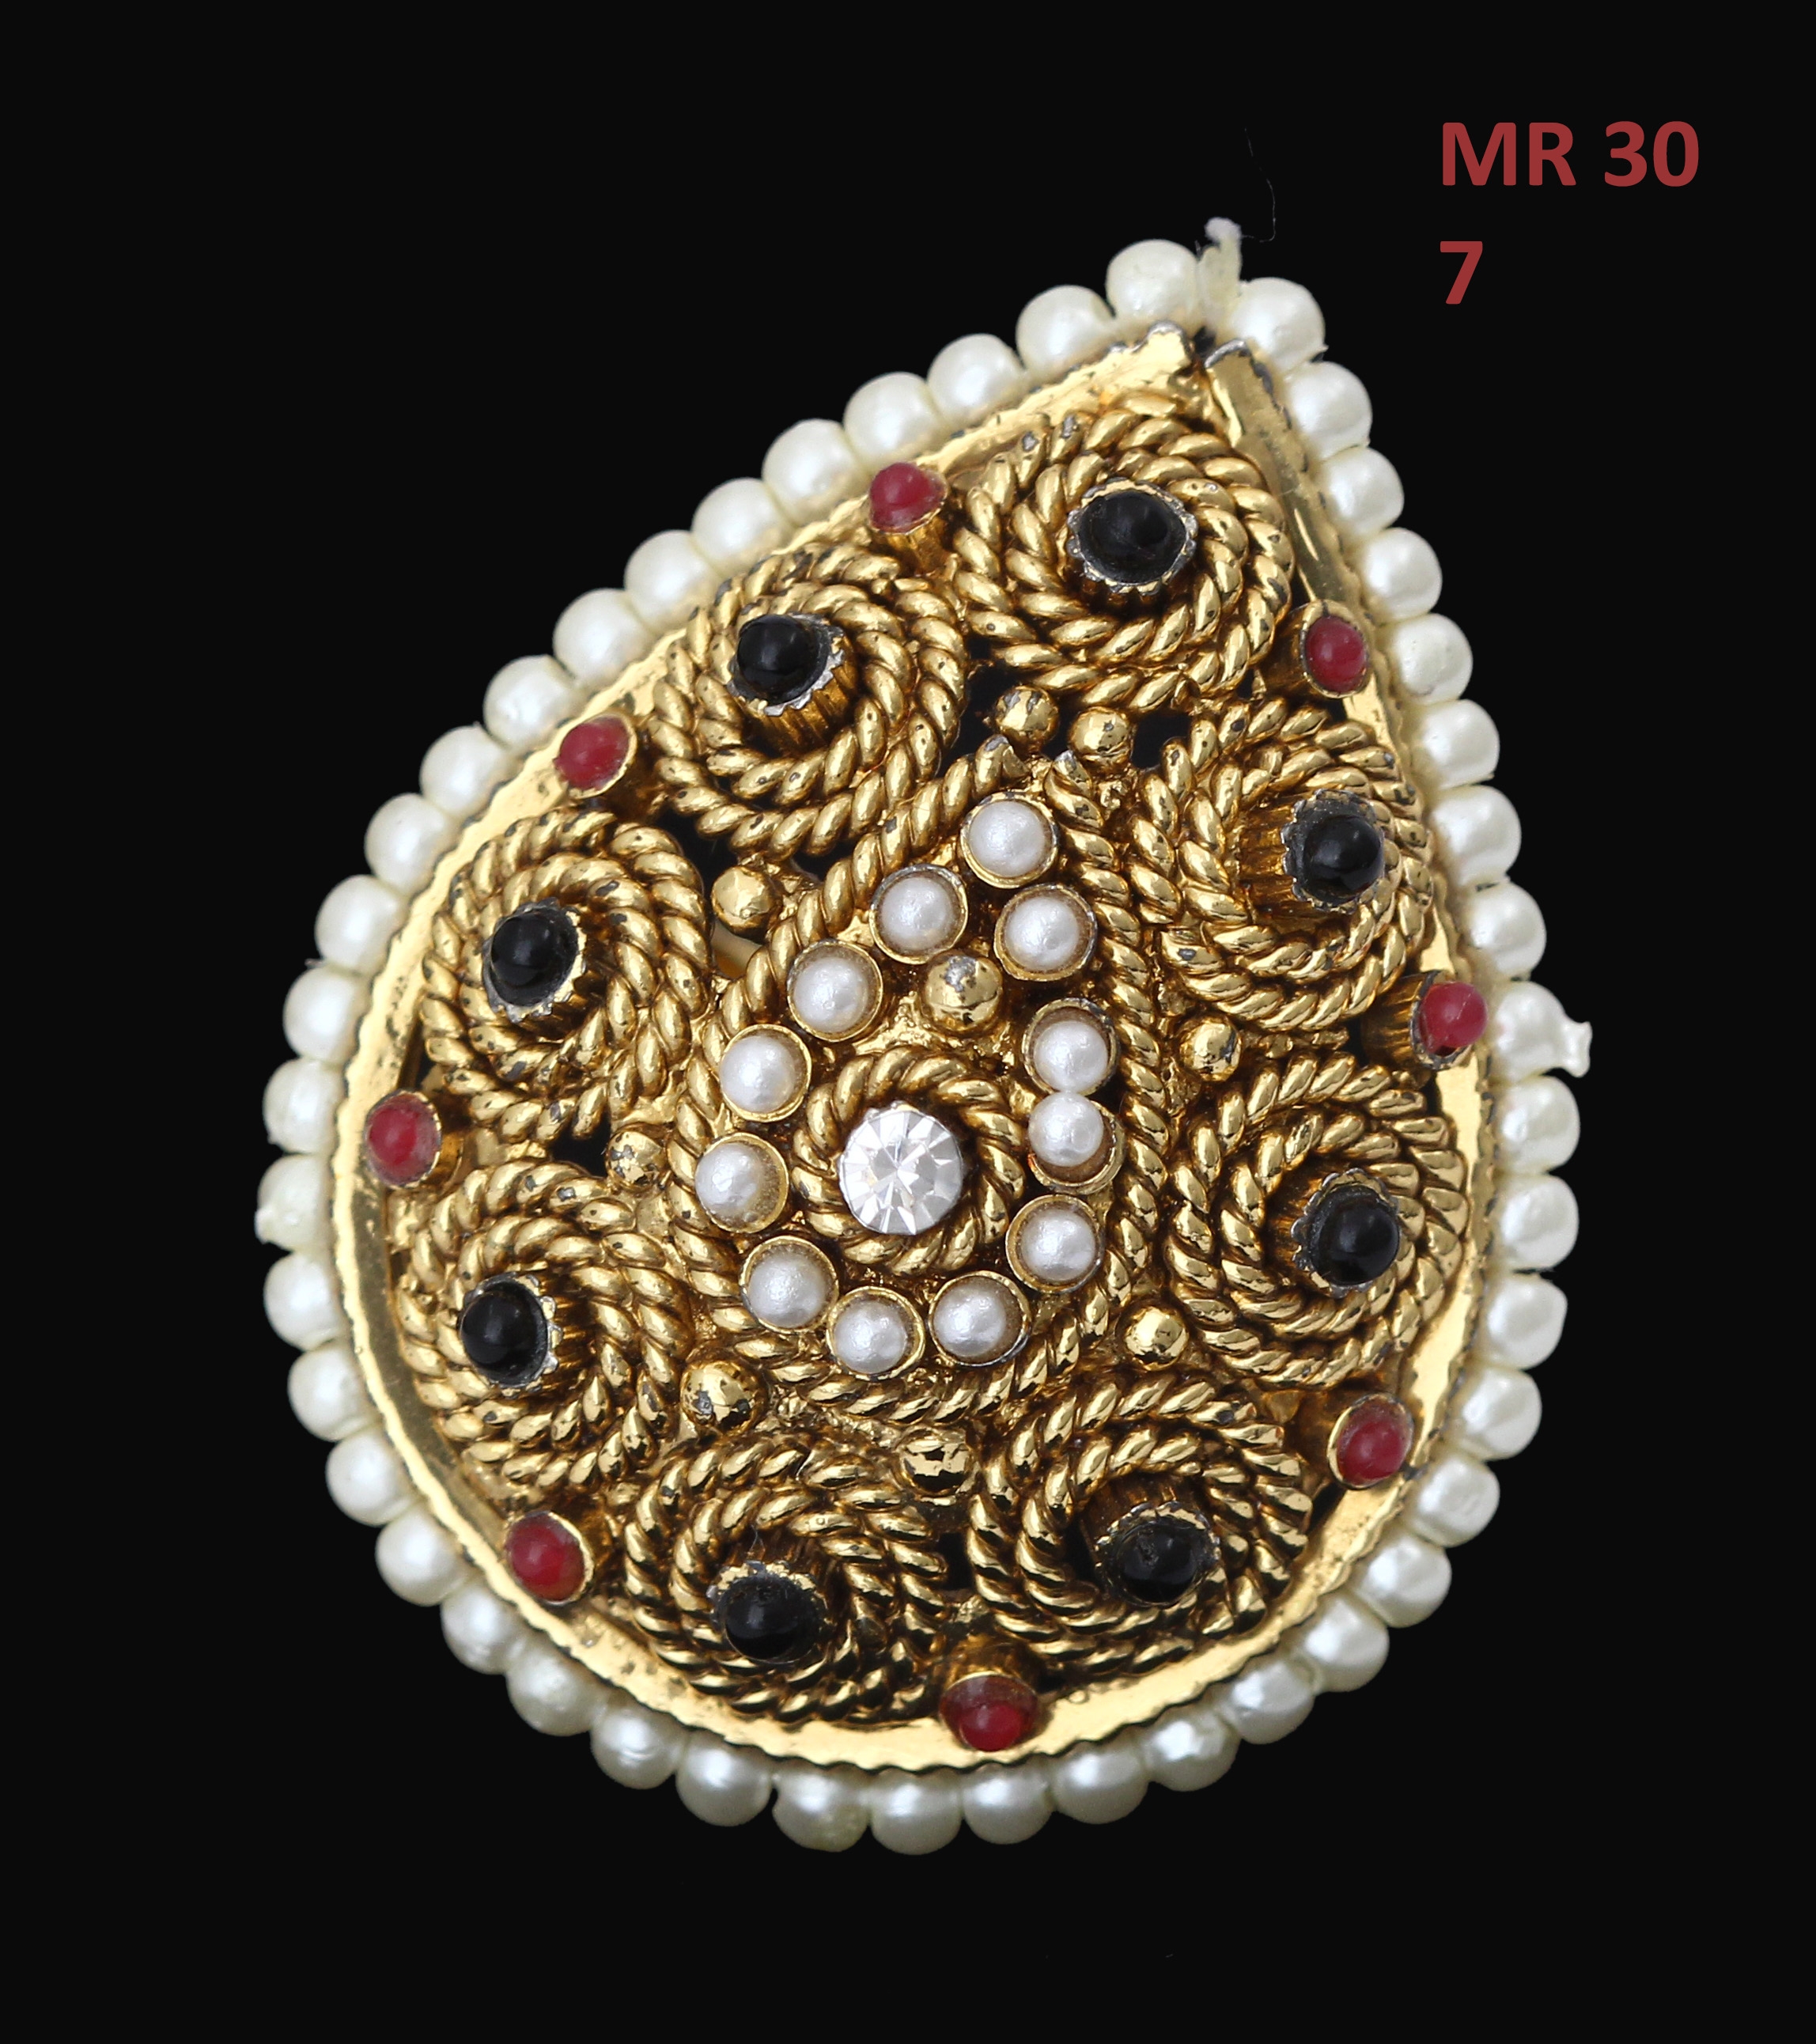 55Carat | Unique Design Polki Ring Pearl,Onyx White,Red,Black Classy 18K Gold Plated Stylish Jewellery For Women Girls Ladies